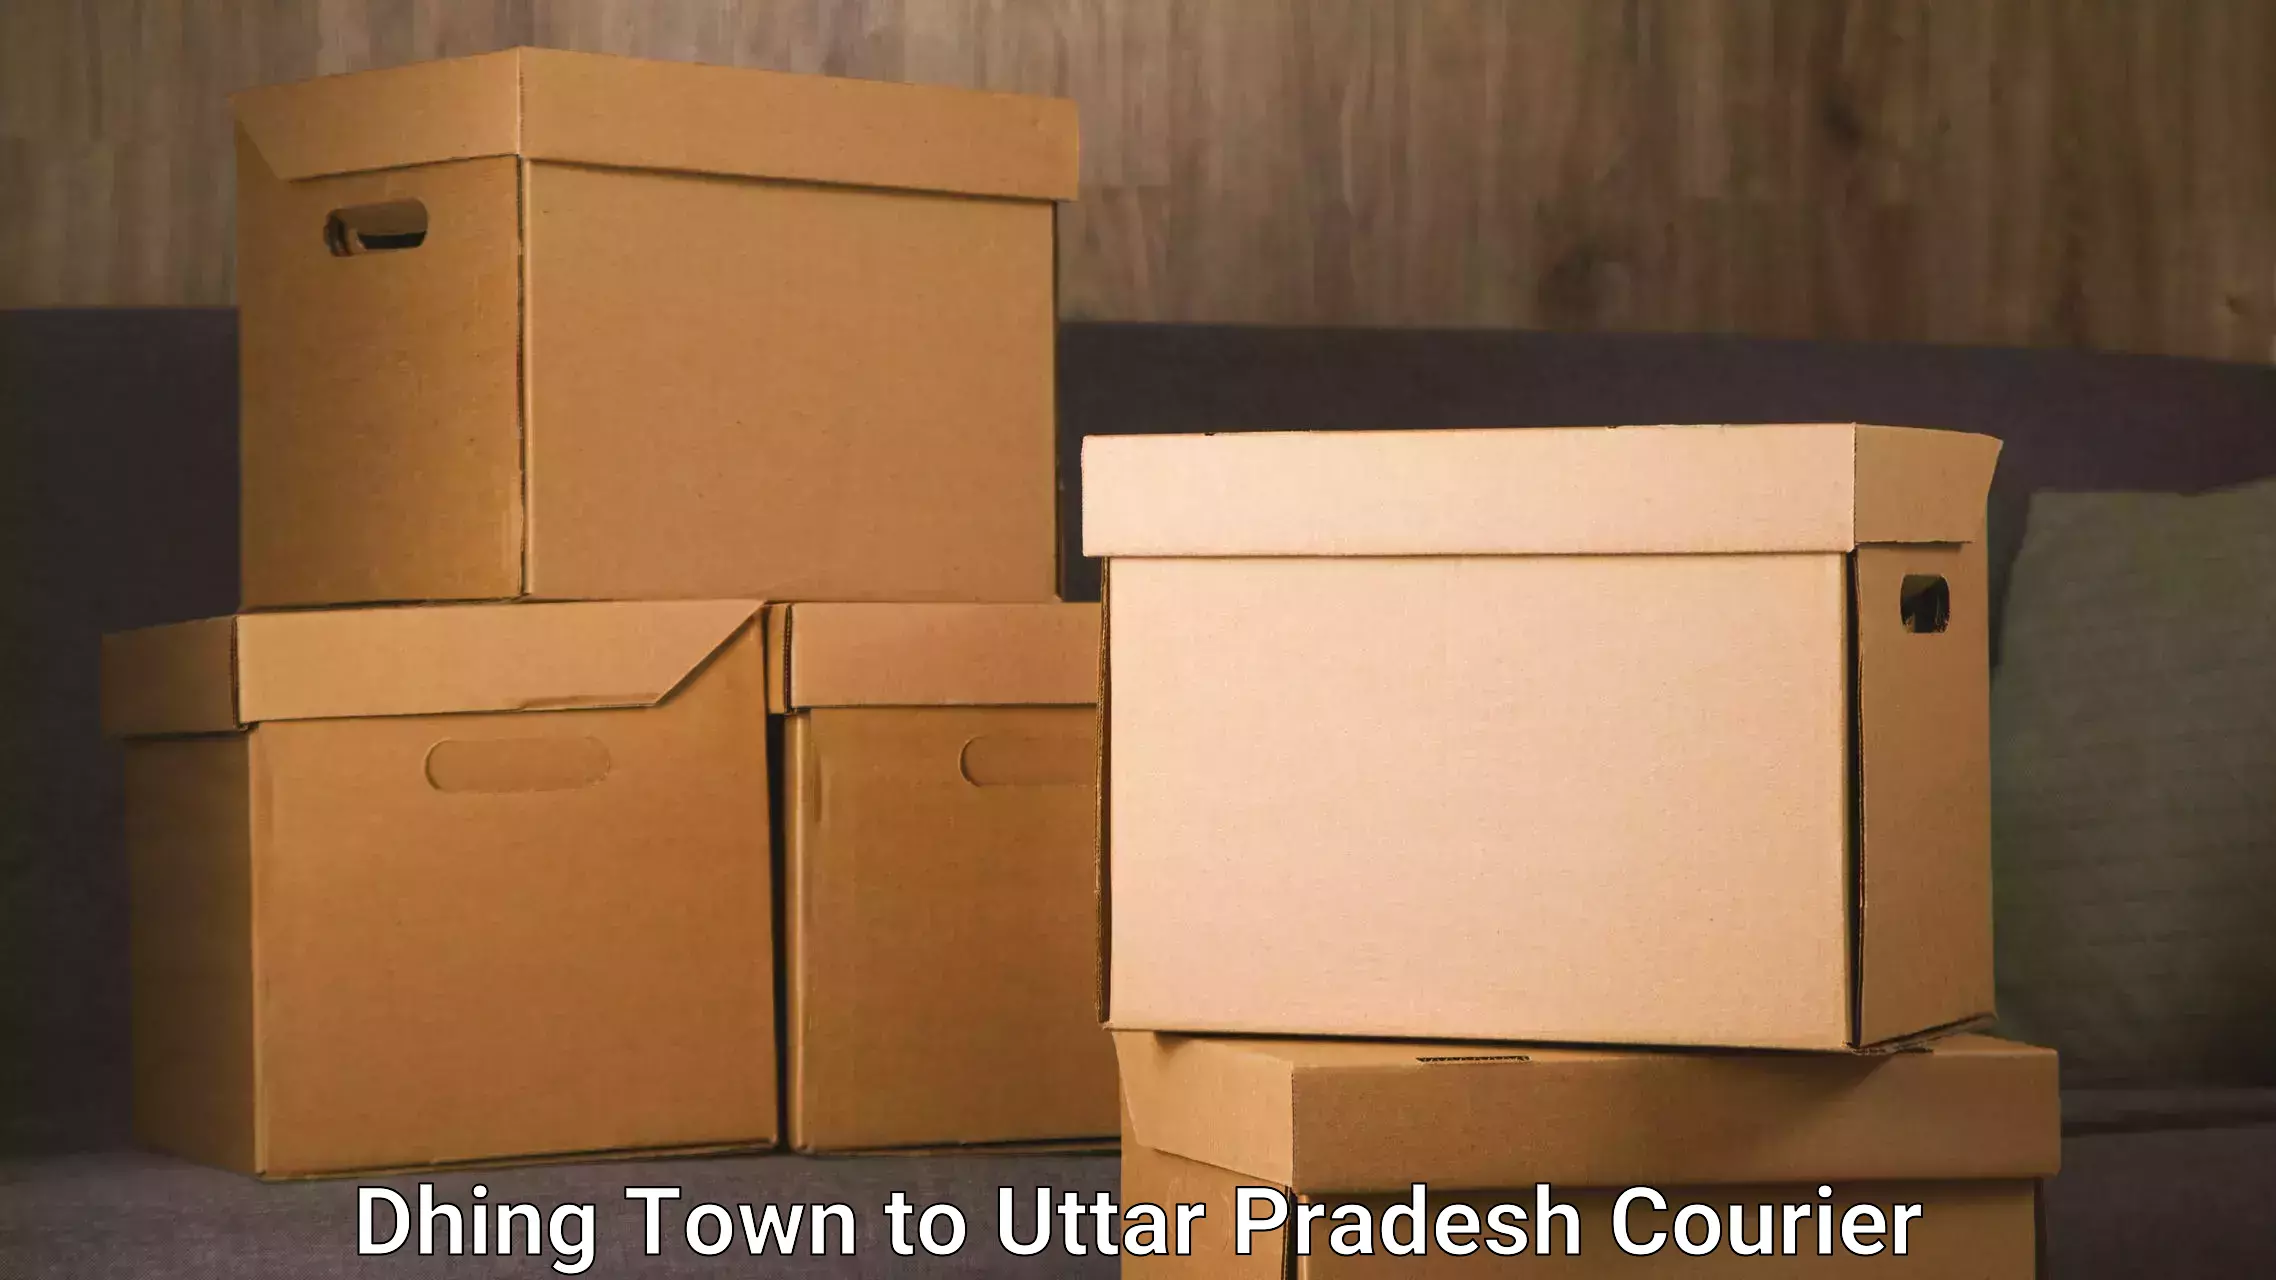 Medical delivery services Dhing Town to Uttar Pradesh